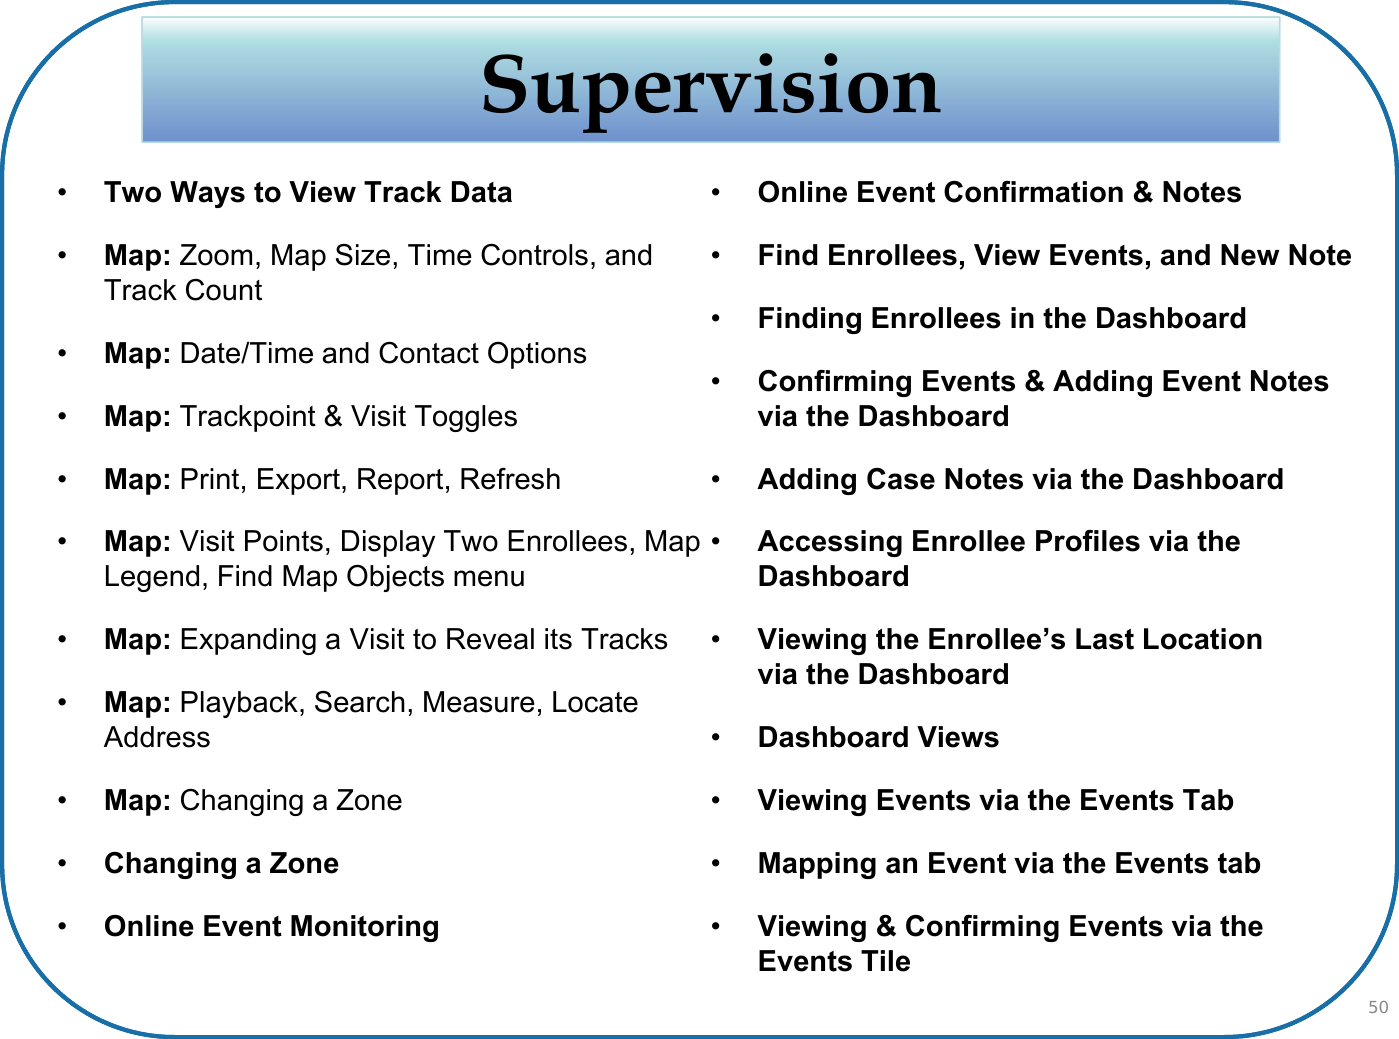 Supervision•Two Ways to View Track Data•Map: Zoom, Map Size, Time Controls, and Track Count•Map: Date/Time and Contact Options•Map: Trackpoint &amp; Visit Toggles•Map: Print, Export, Report, Refresh•Map: Visit Points, Display Two Enrollees, Map Legend, Find Map Objects menu•Map: Expanding a Visit to Reveal its Tracks•Map: Playback, Search, Measure, Locate Address•Map: Changing a Zone•Changing a Zone•Online Event Monitoring•Online Event Confirmation &amp; Notes•Find Enrollees, View Events, and New Note•Finding Enrollees in the Dashboard•Confirming Events &amp; Adding Event Notesvia the Dashboard•Adding Case Notes via the Dashboard•Accessing Enrollee Profiles via the Dashboard•Viewing the Enrollee’s Last Locationvia the Dashboard•Dashboard Views•Viewing Events via the Events Tab•Mapping an Event via the Events tab•Viewing &amp; Confirming Events via the Events Tile50